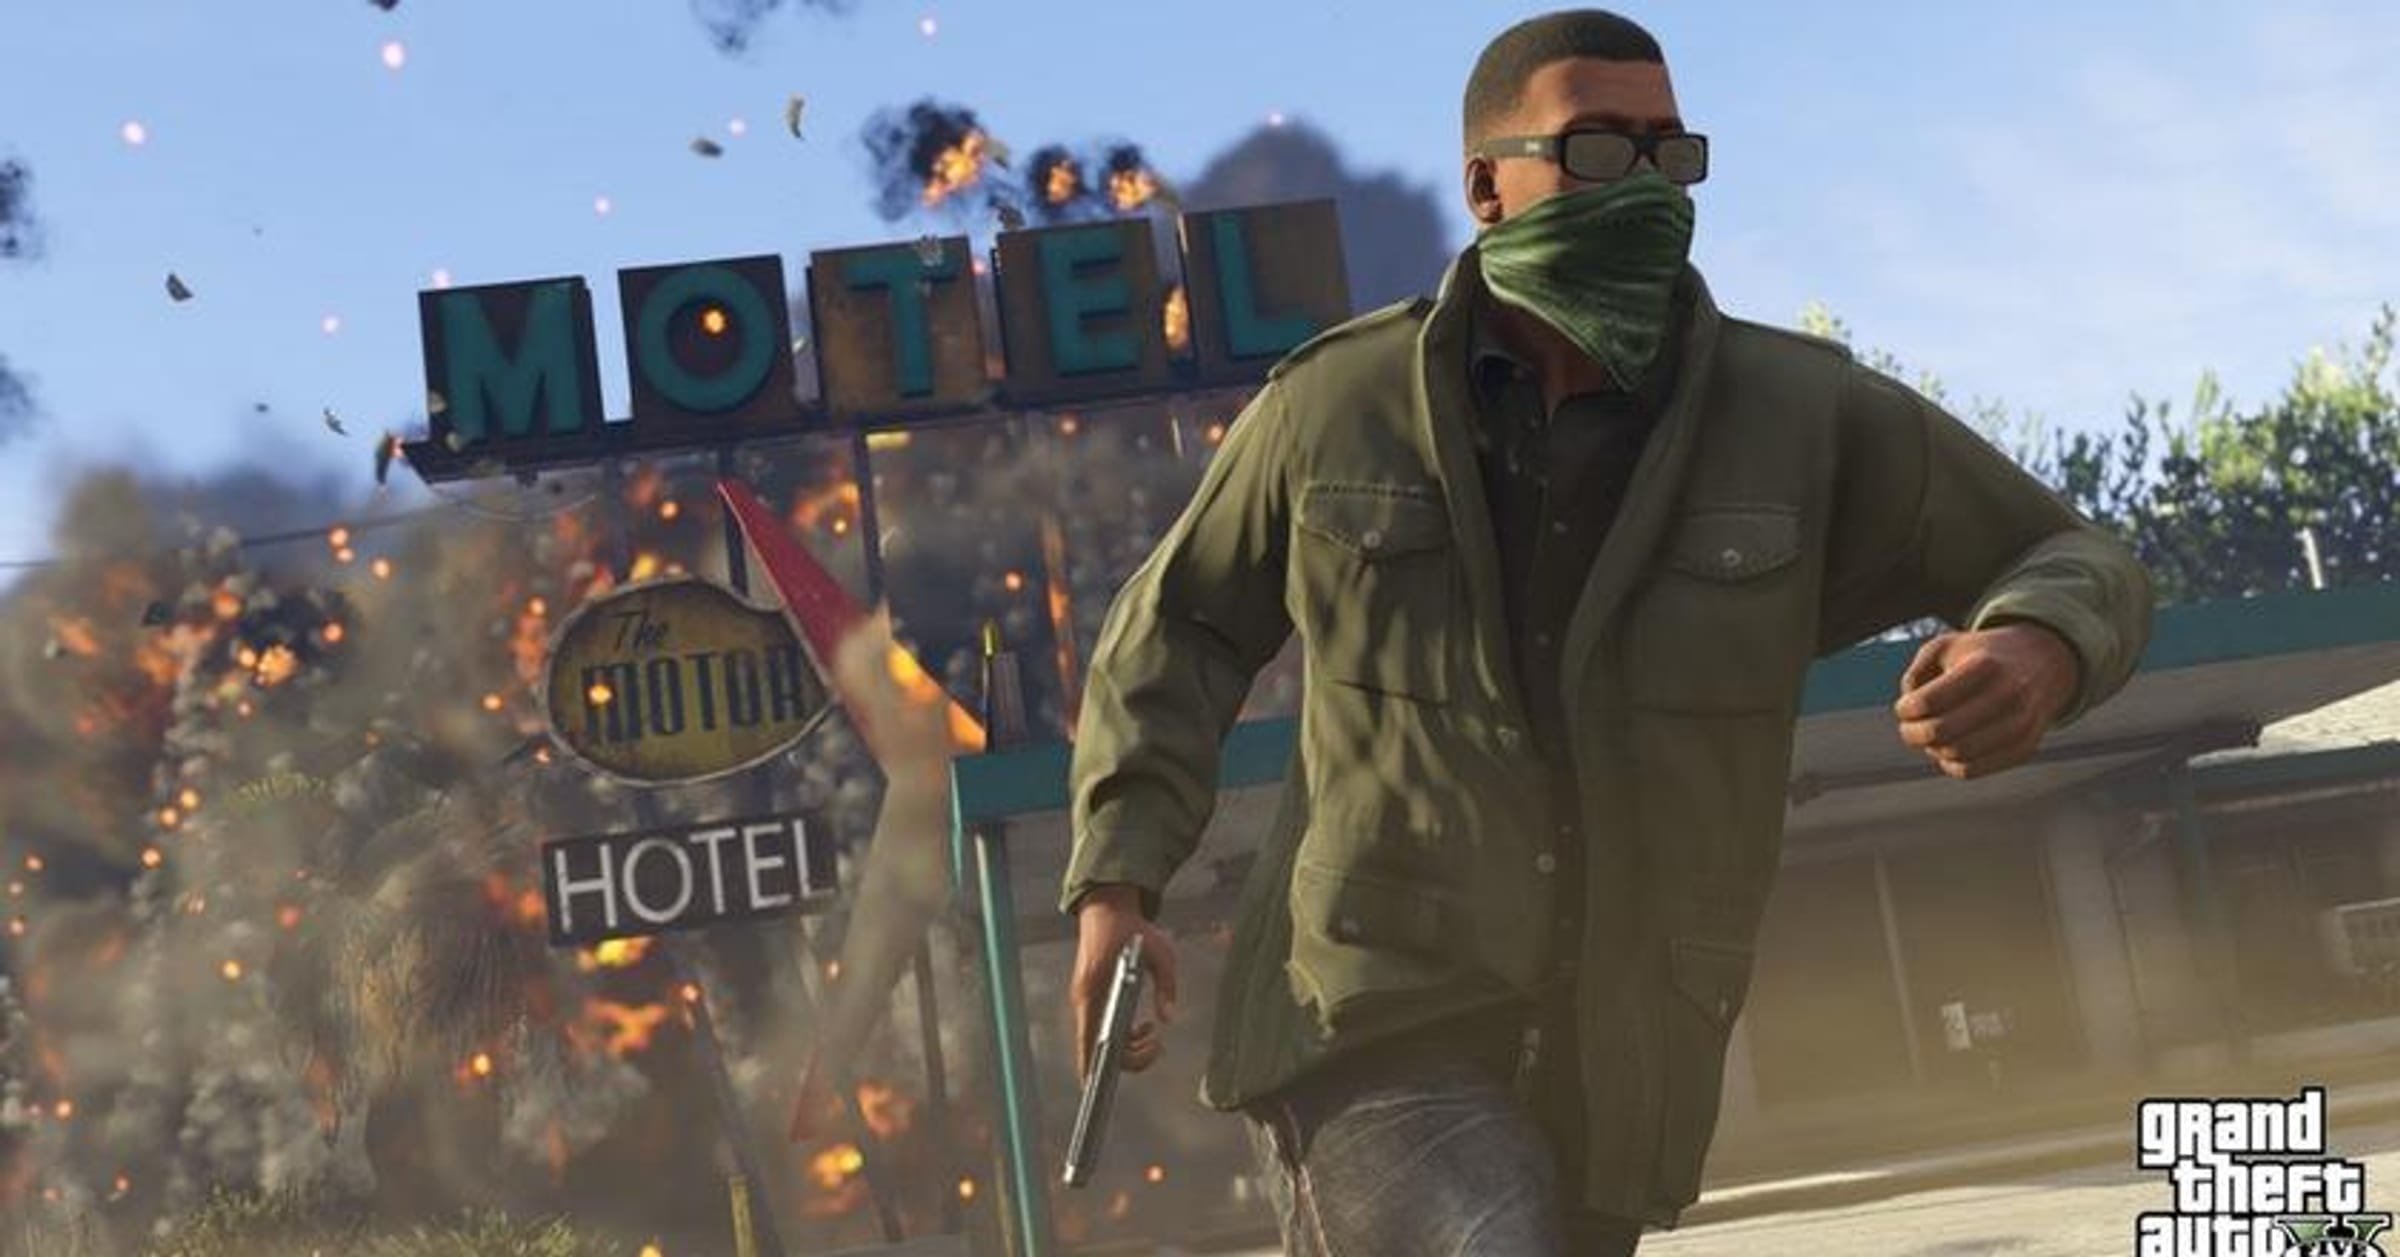 GTA 6 map compared to GTA 5 leaves fans unhappy